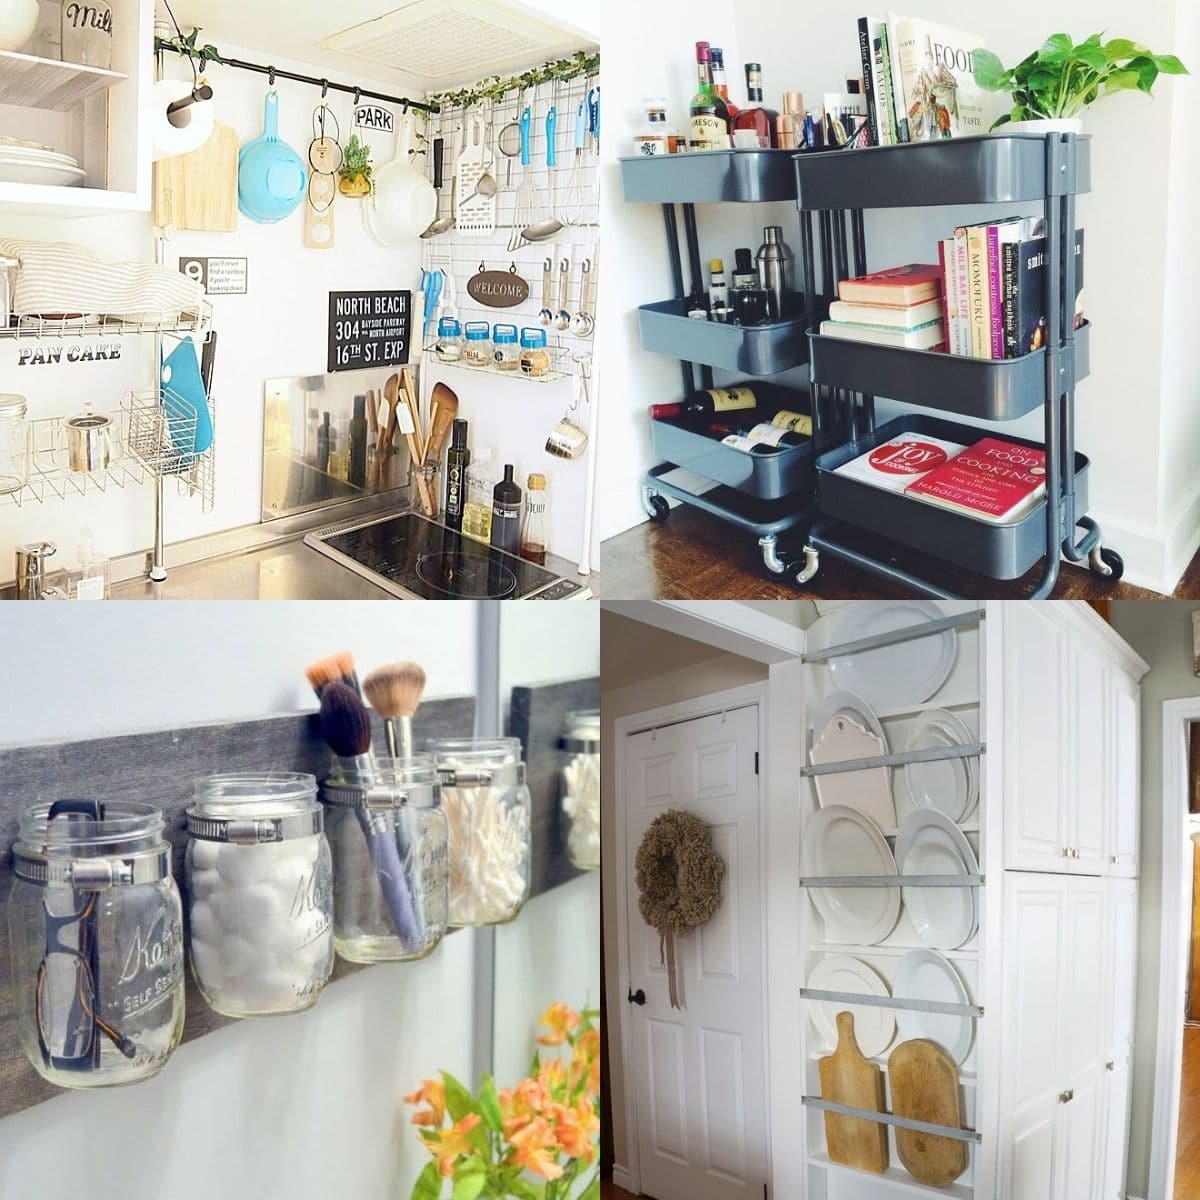 Got a small space that could do with more storage?

Check out these storage ideas for even the smallest room. 😉

#Storage #StorageSpaces #StorageSpaceIdeas #SmallSpaces 
 #buyersagent #listingspecialist
 LocalInfoForYou.com/102962/storage…